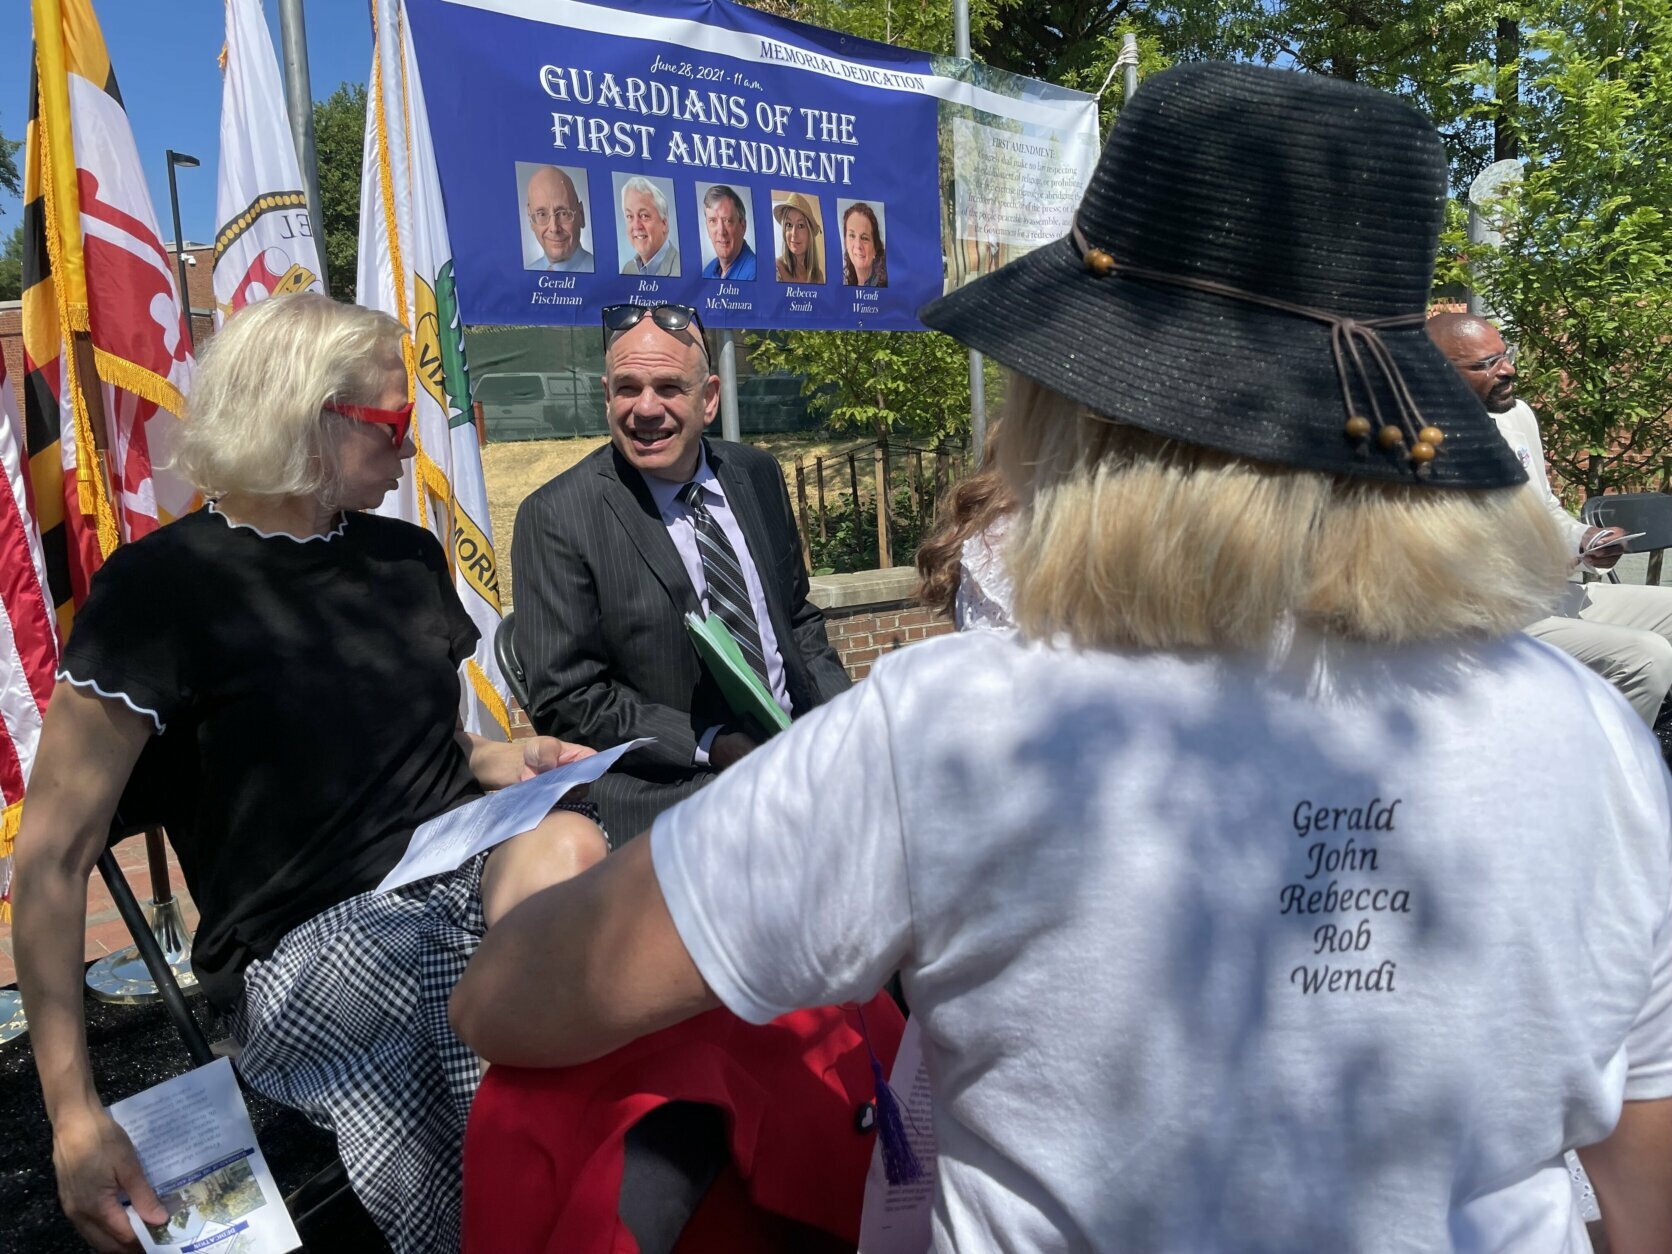 Survivors and family members of victims of the five people who died in a mass shooting at the Capital Gazette newspaper dedicated a memorial to them and the First Amendment on Monday on the third anniversary of the attack (WTOP/Meghan Cloherty).